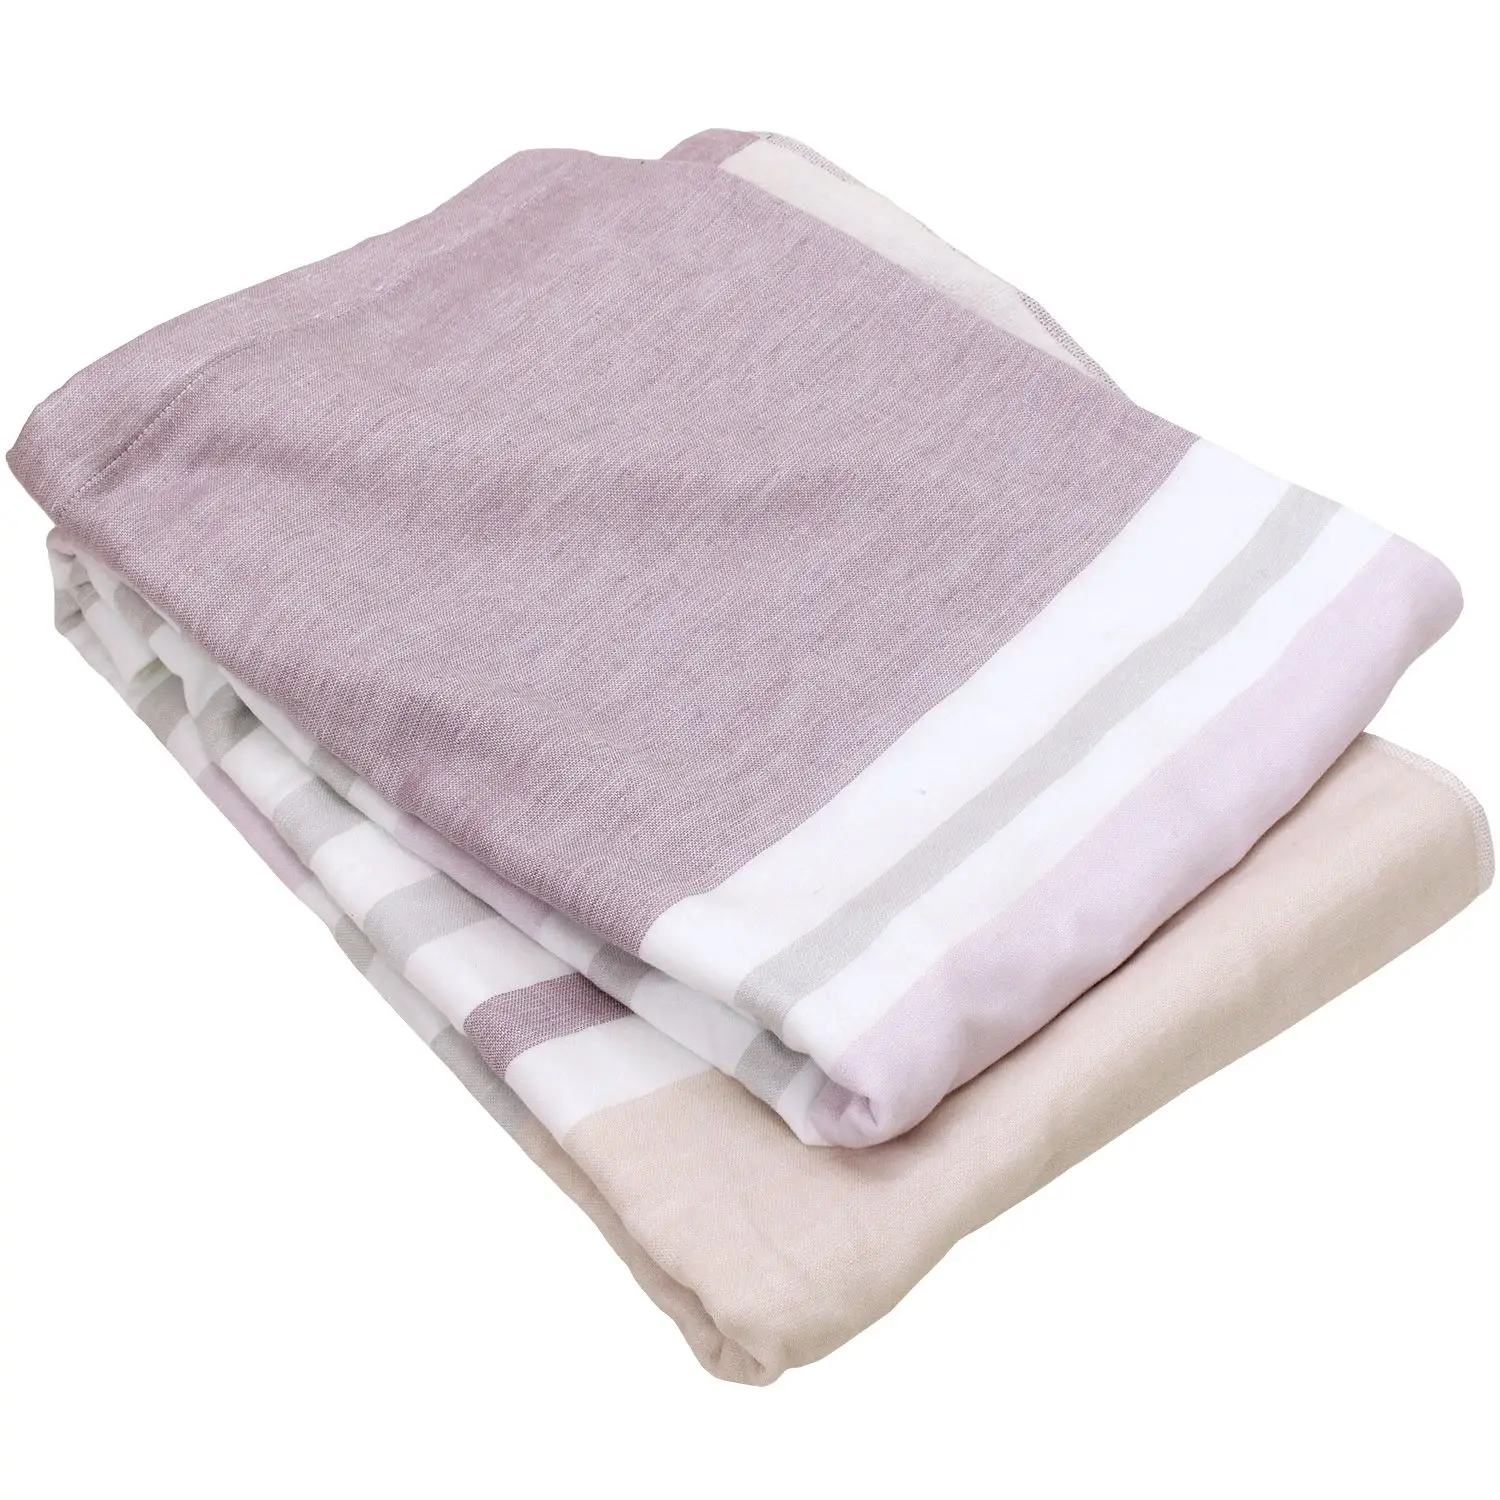 [Wholesale Products] HIORIE Imabari Brand Gauze Towel Blanket 100% Cotton 145*190cm Low MOQ Washable Soft Throws Striped Purple